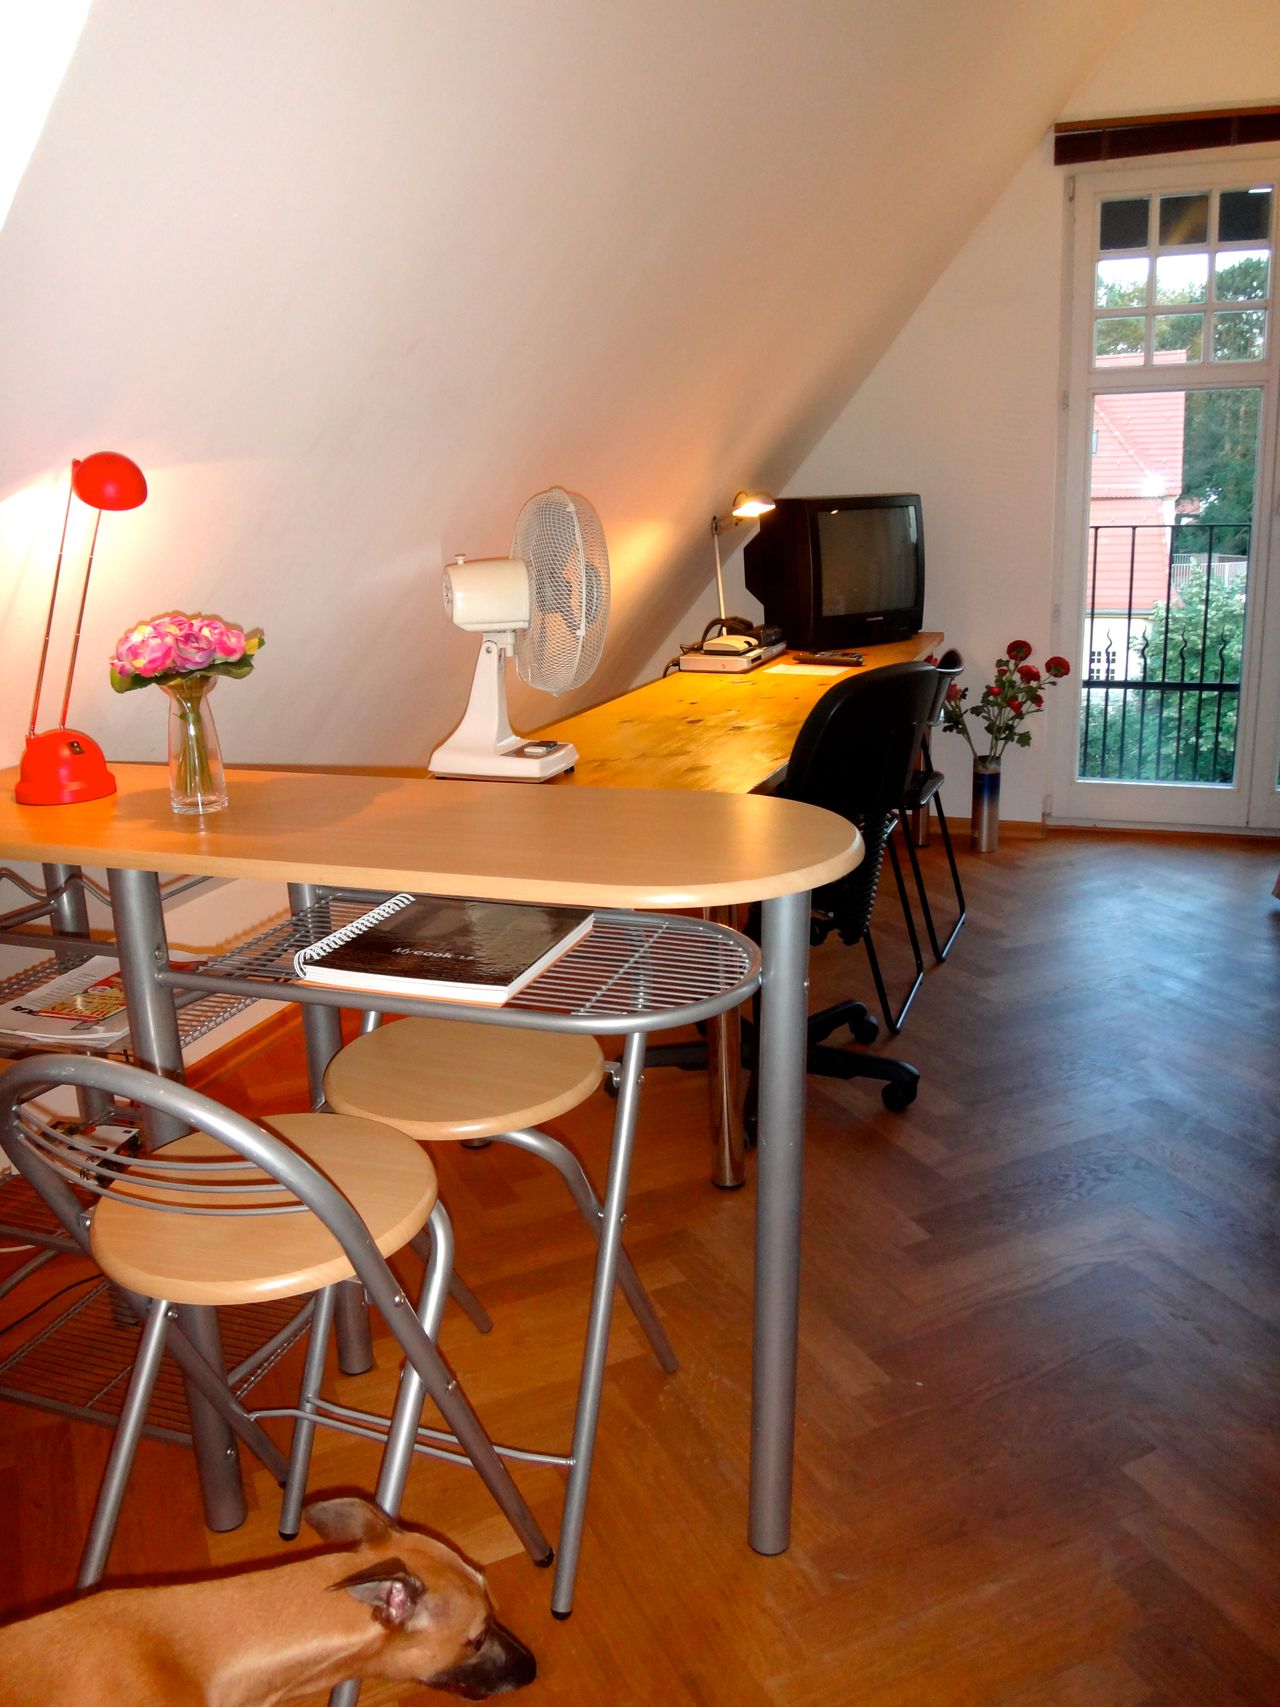 Small top roof apartment in Zehlendorf